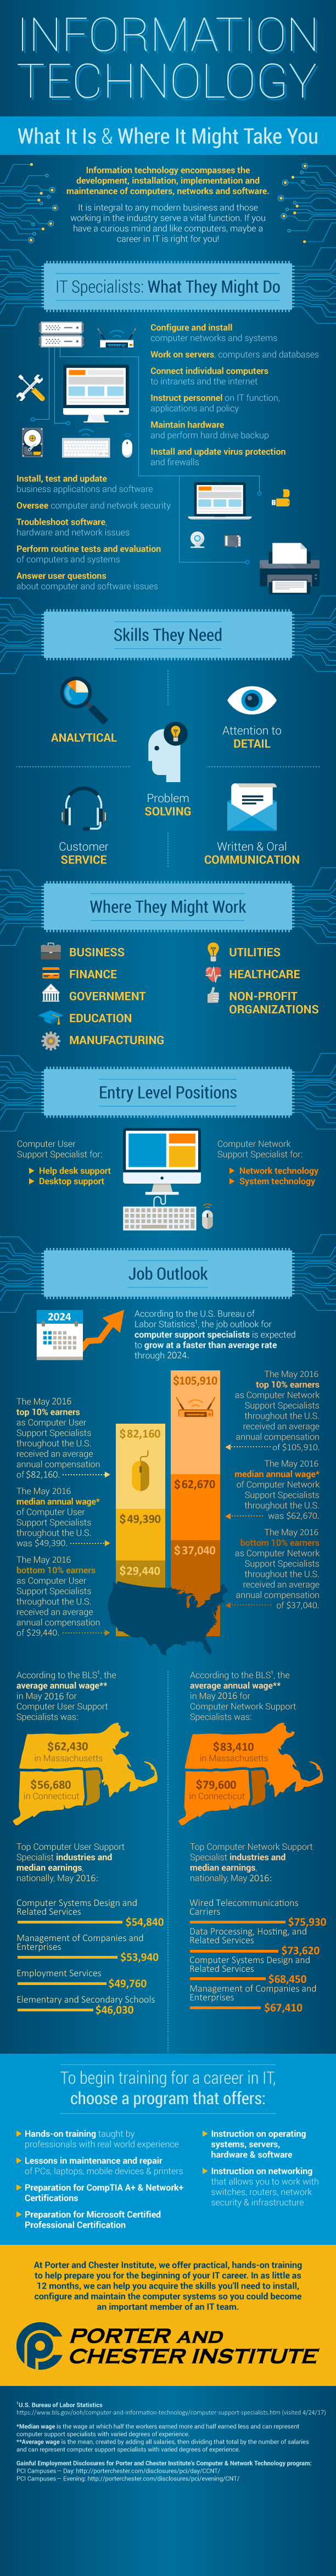 Computer and Network Technology Infographic